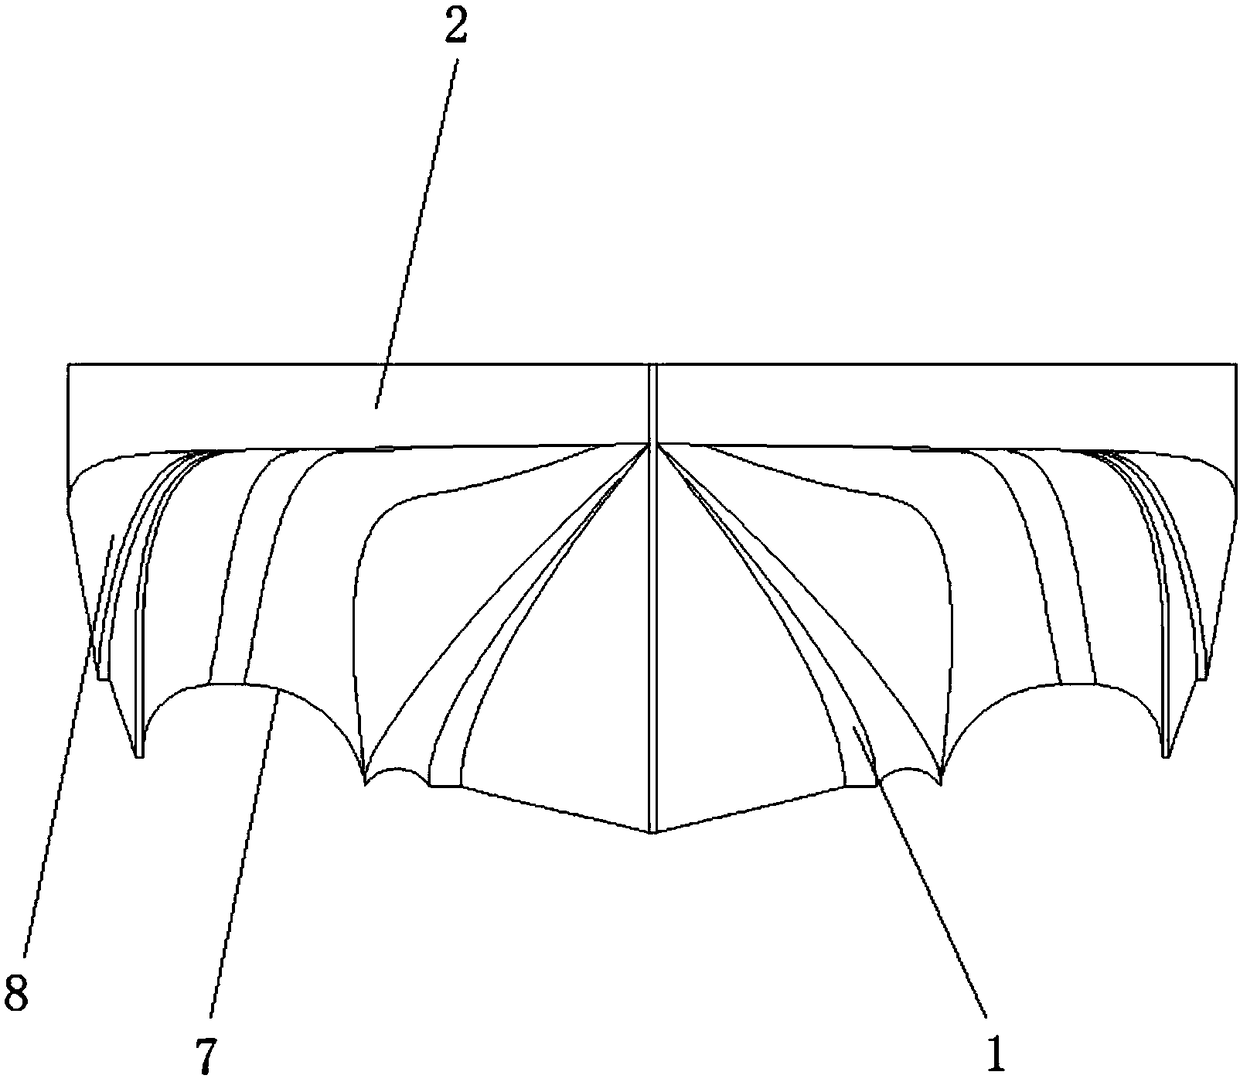 A three-hull slotted boat with an axe-shaped bow